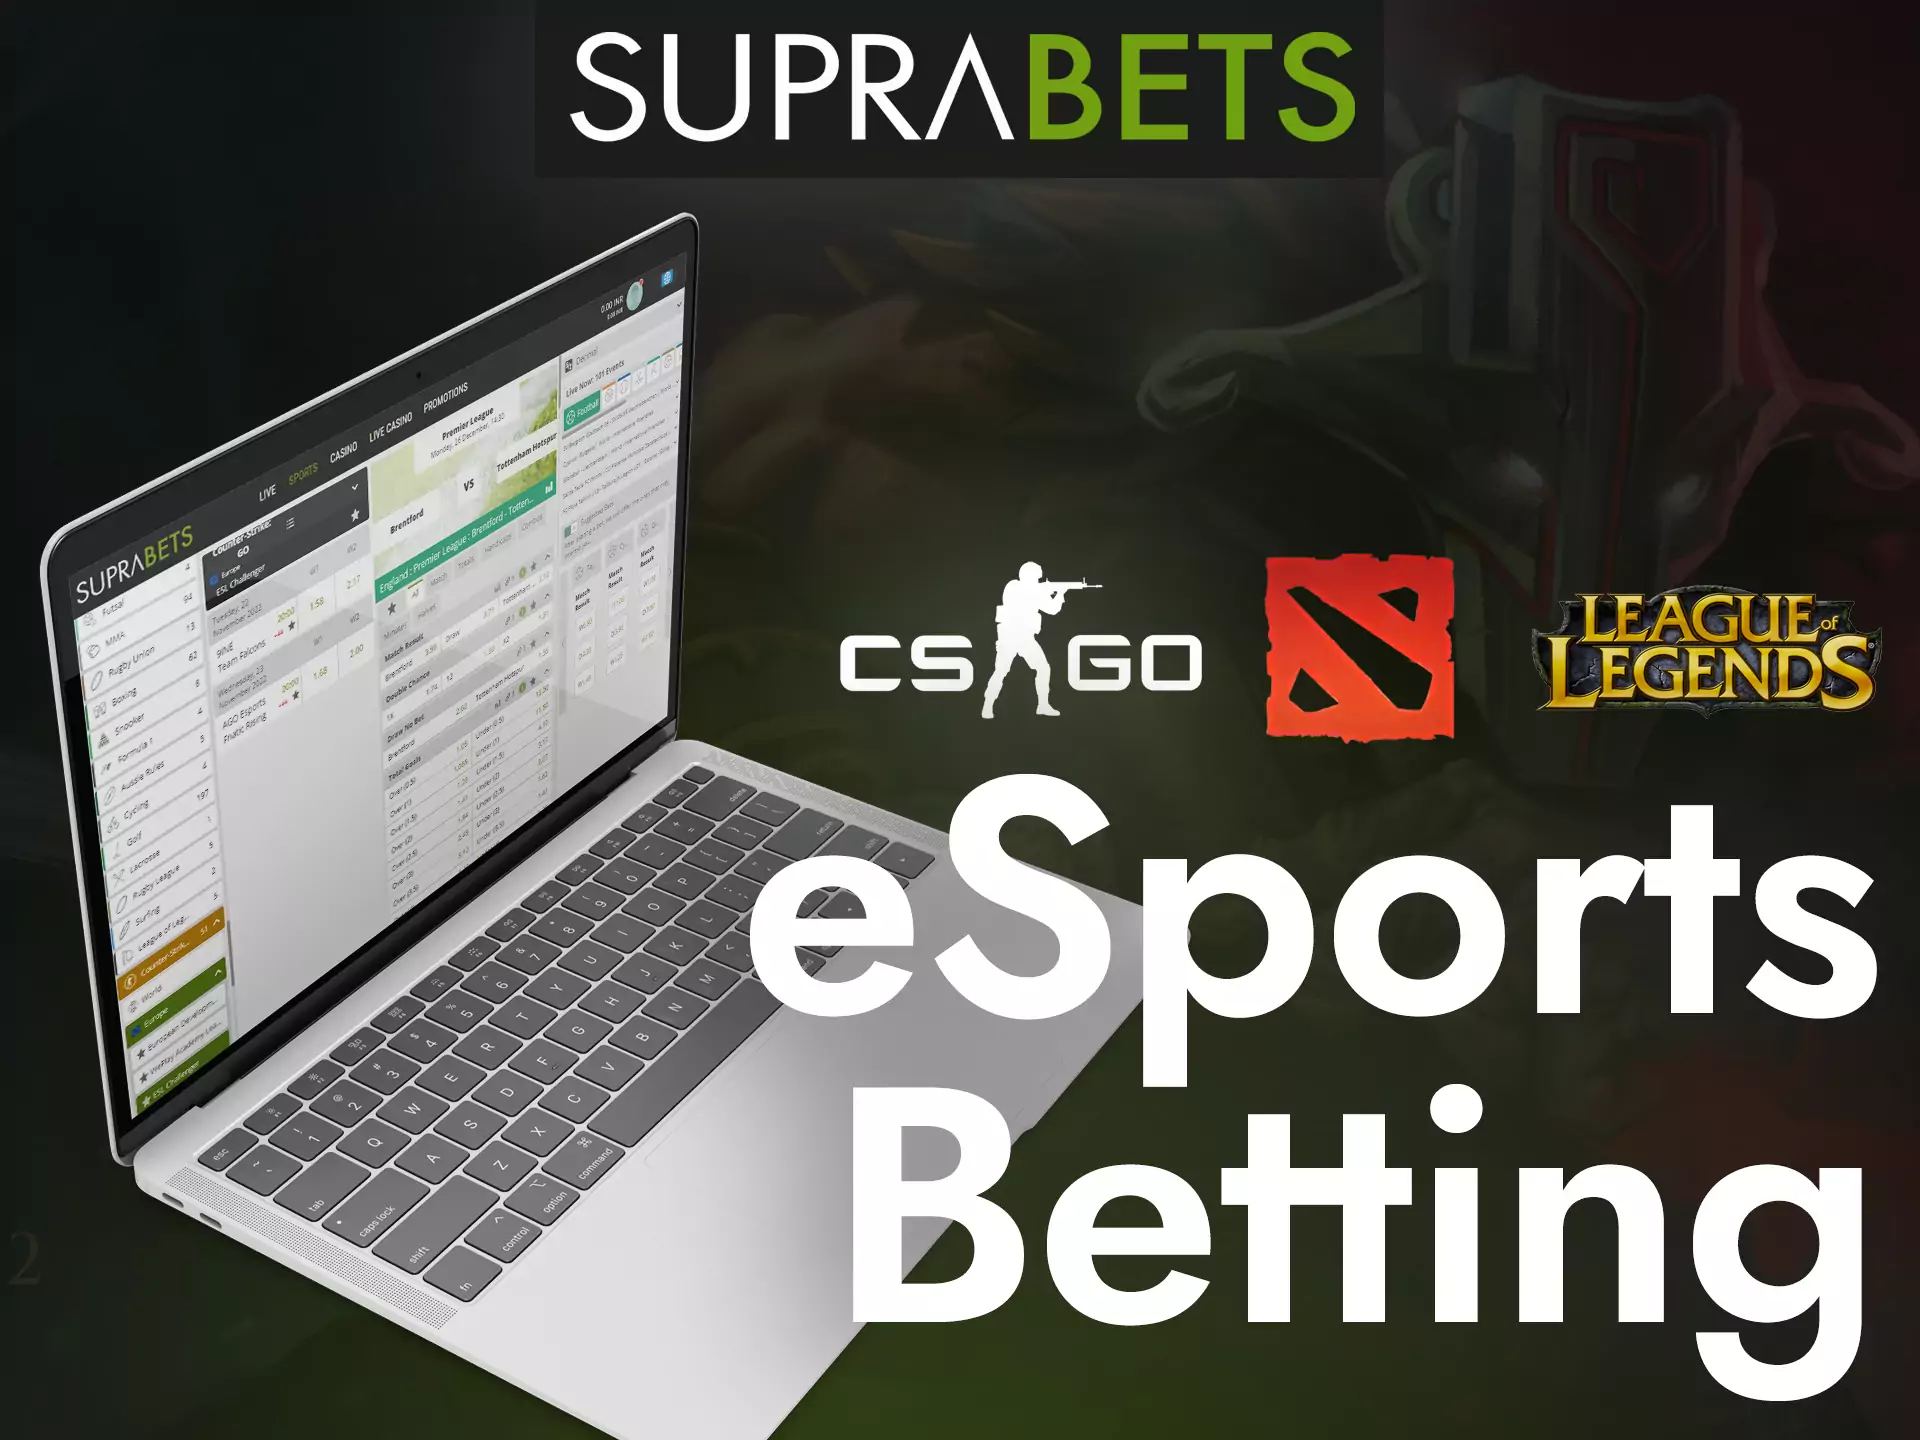 If you are a fan of esports, then place bets with Suprabets.